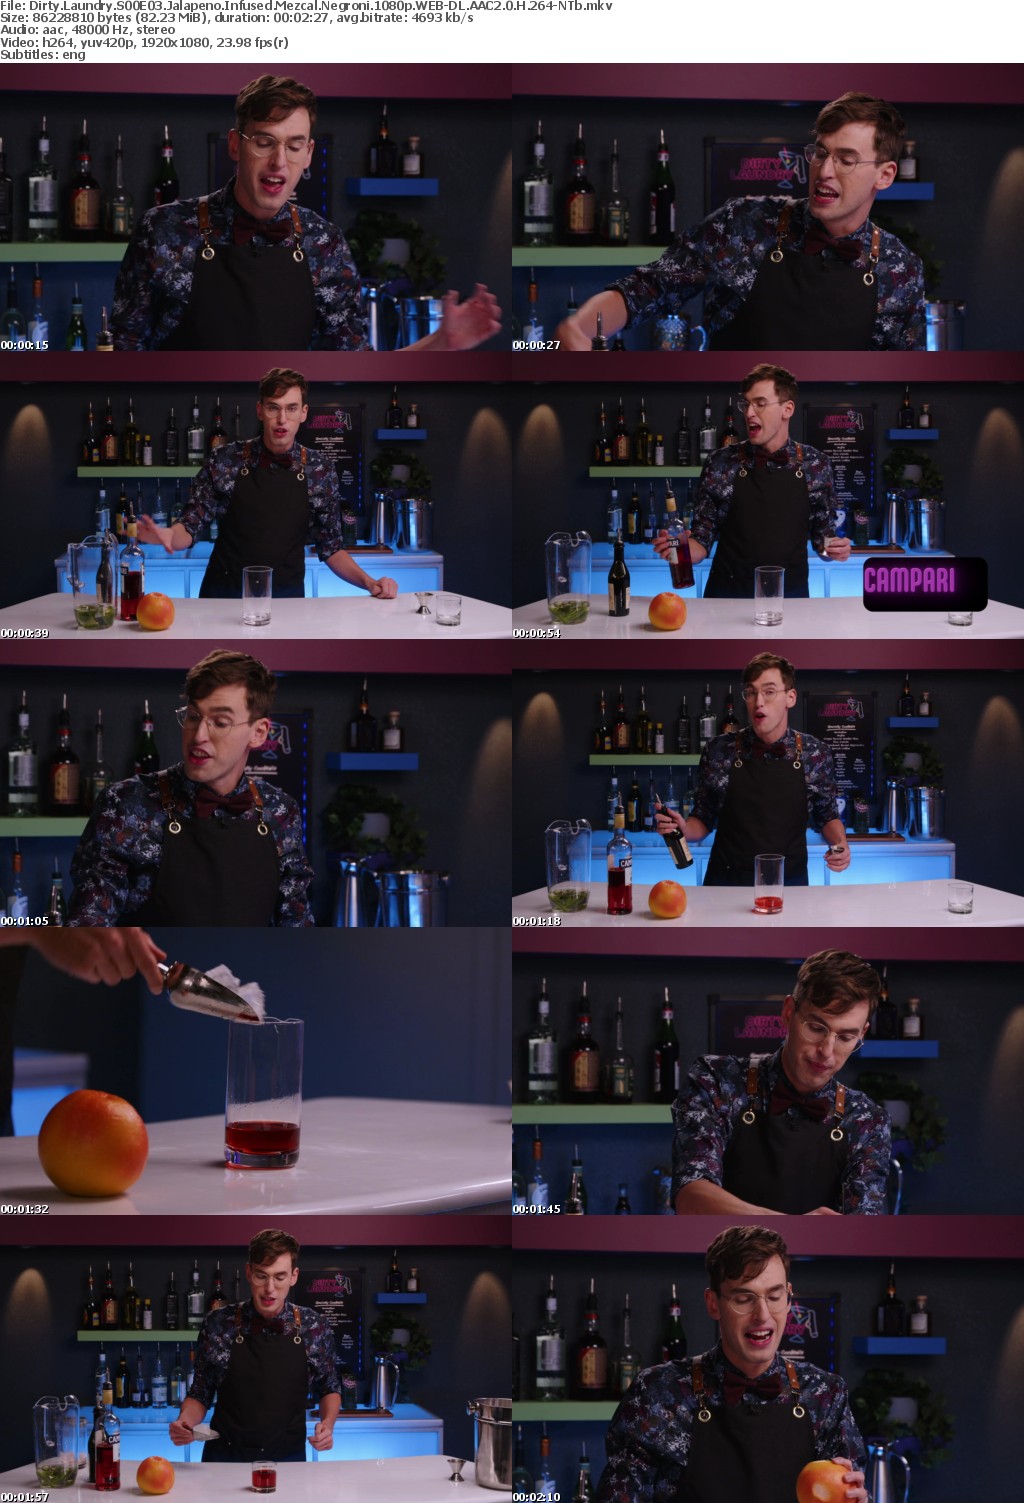 Dirty Laundry S00E03 Jalapeno Infused Mezcal Negroni 1080p WEB-DL AAC2 0 H 264-NTb